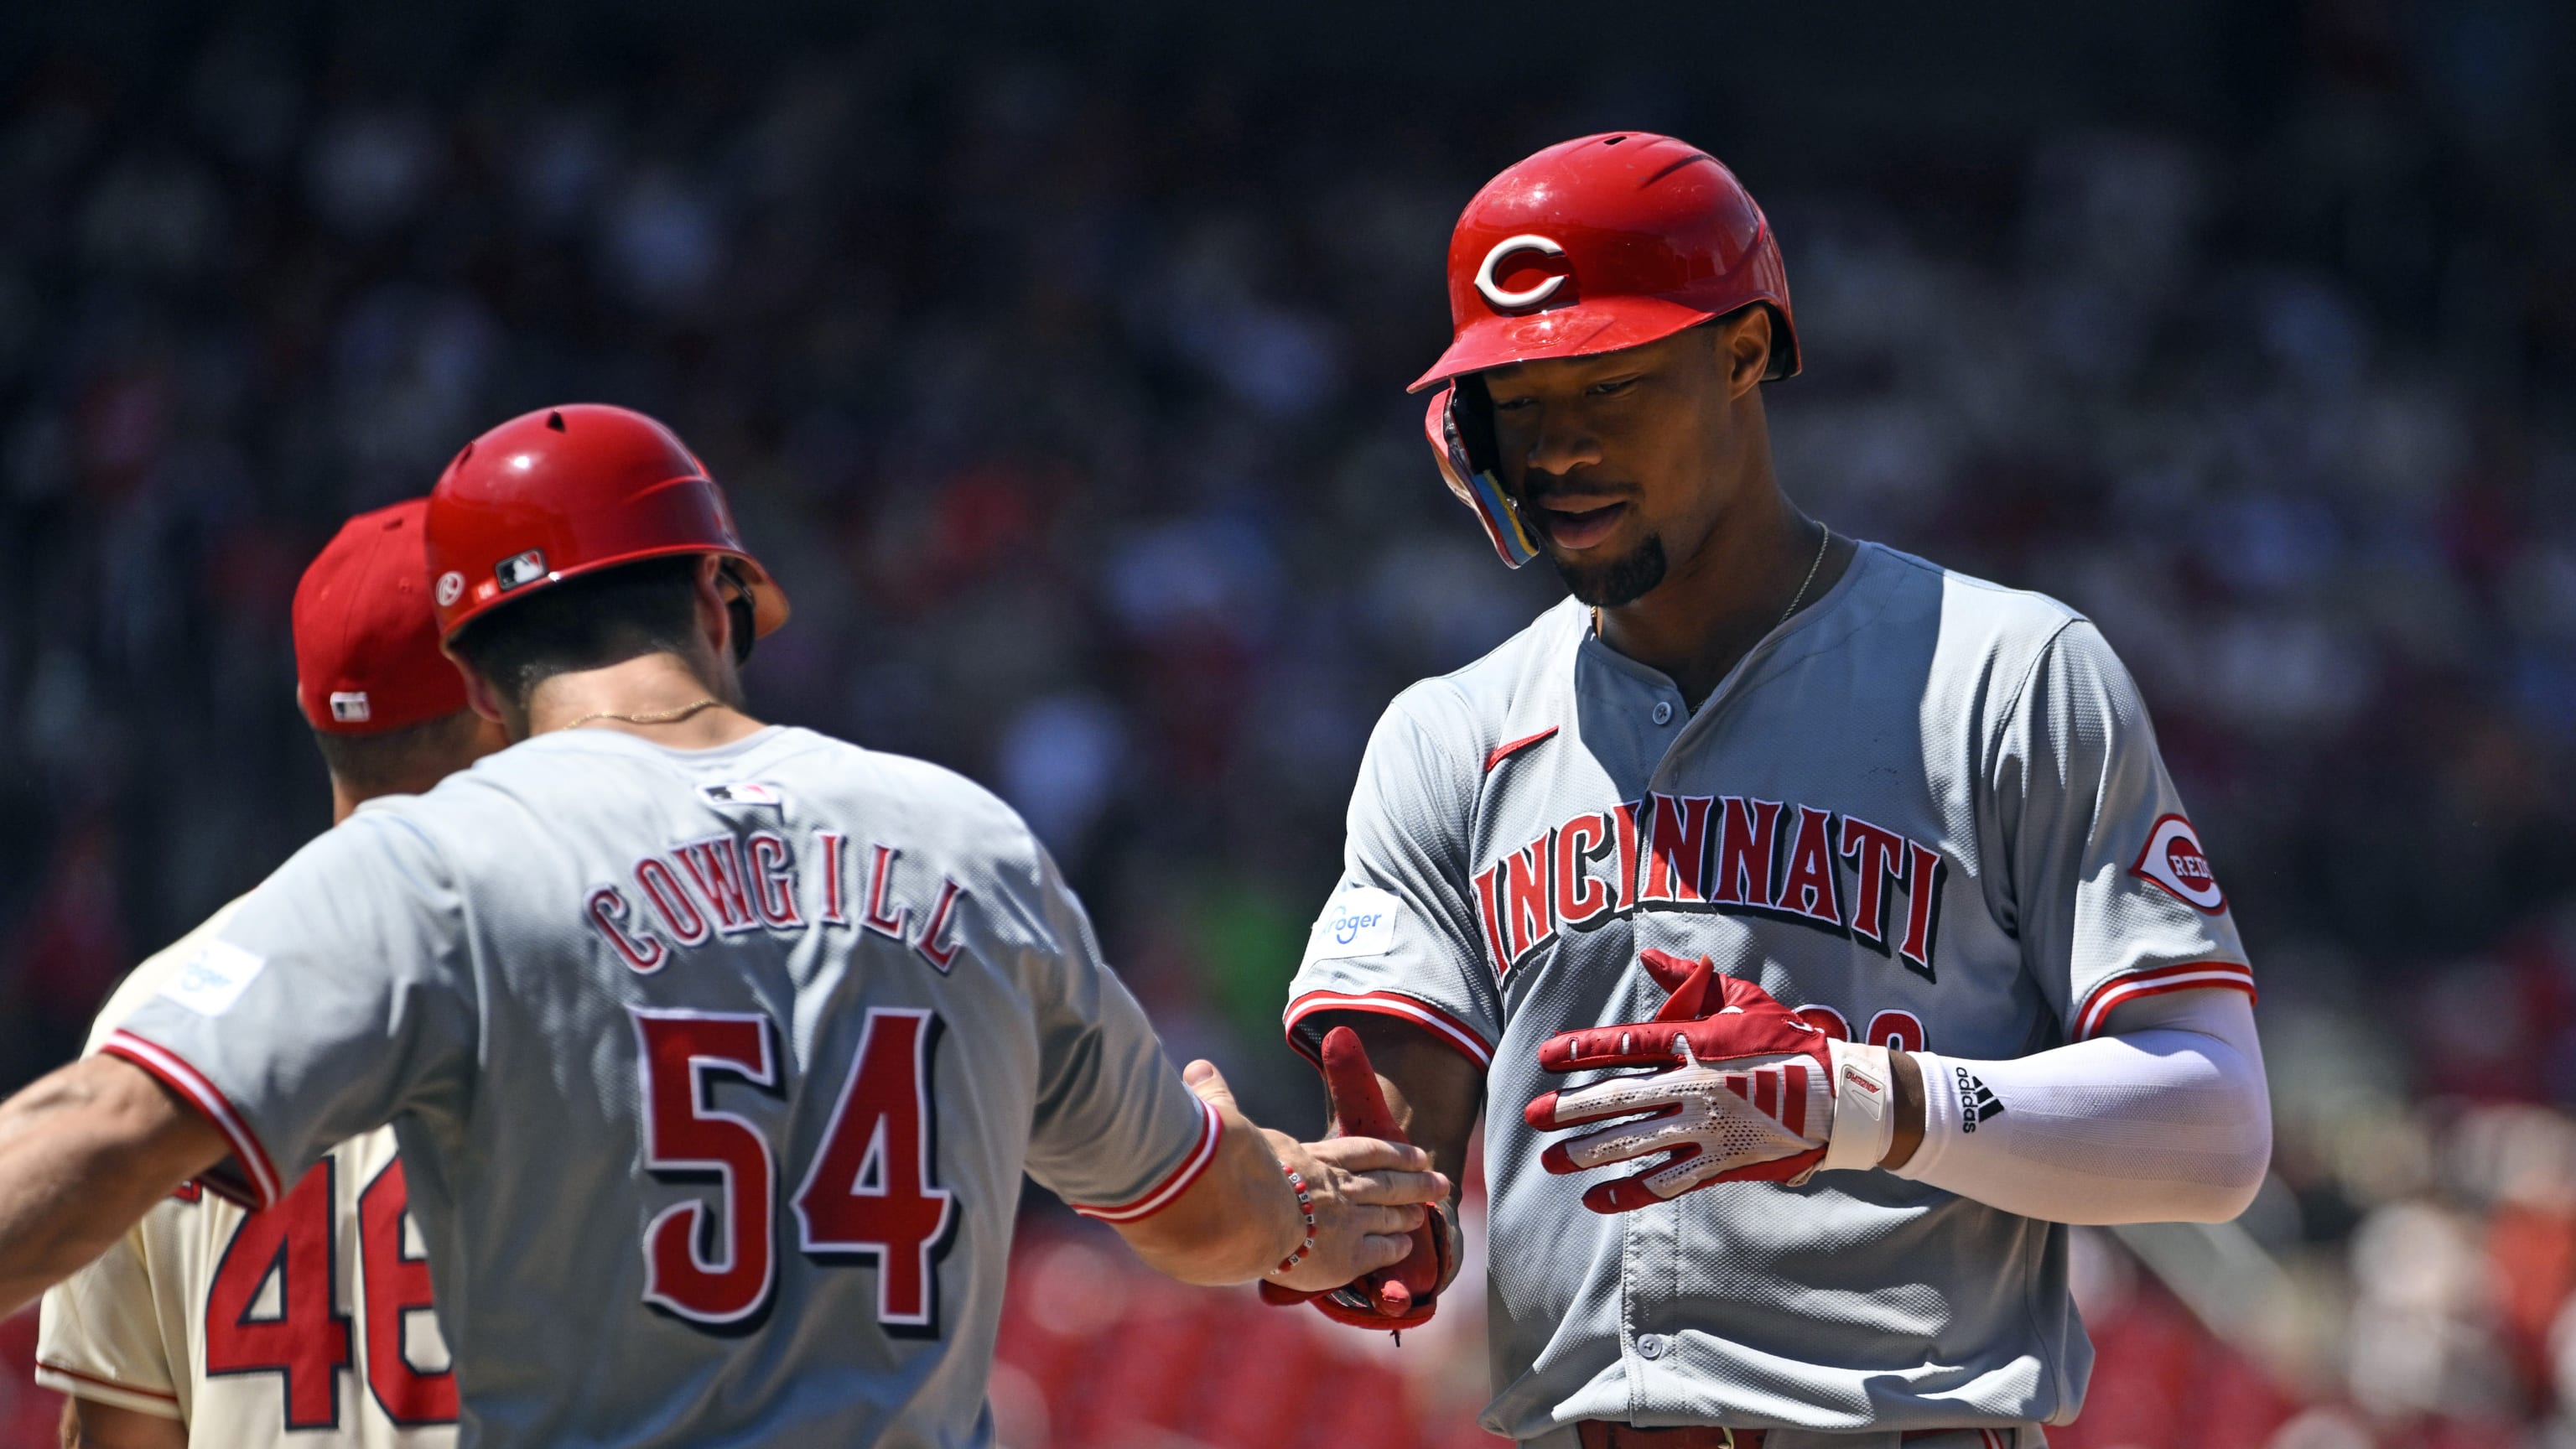 Reds' offense comes to life in win over Cardinals